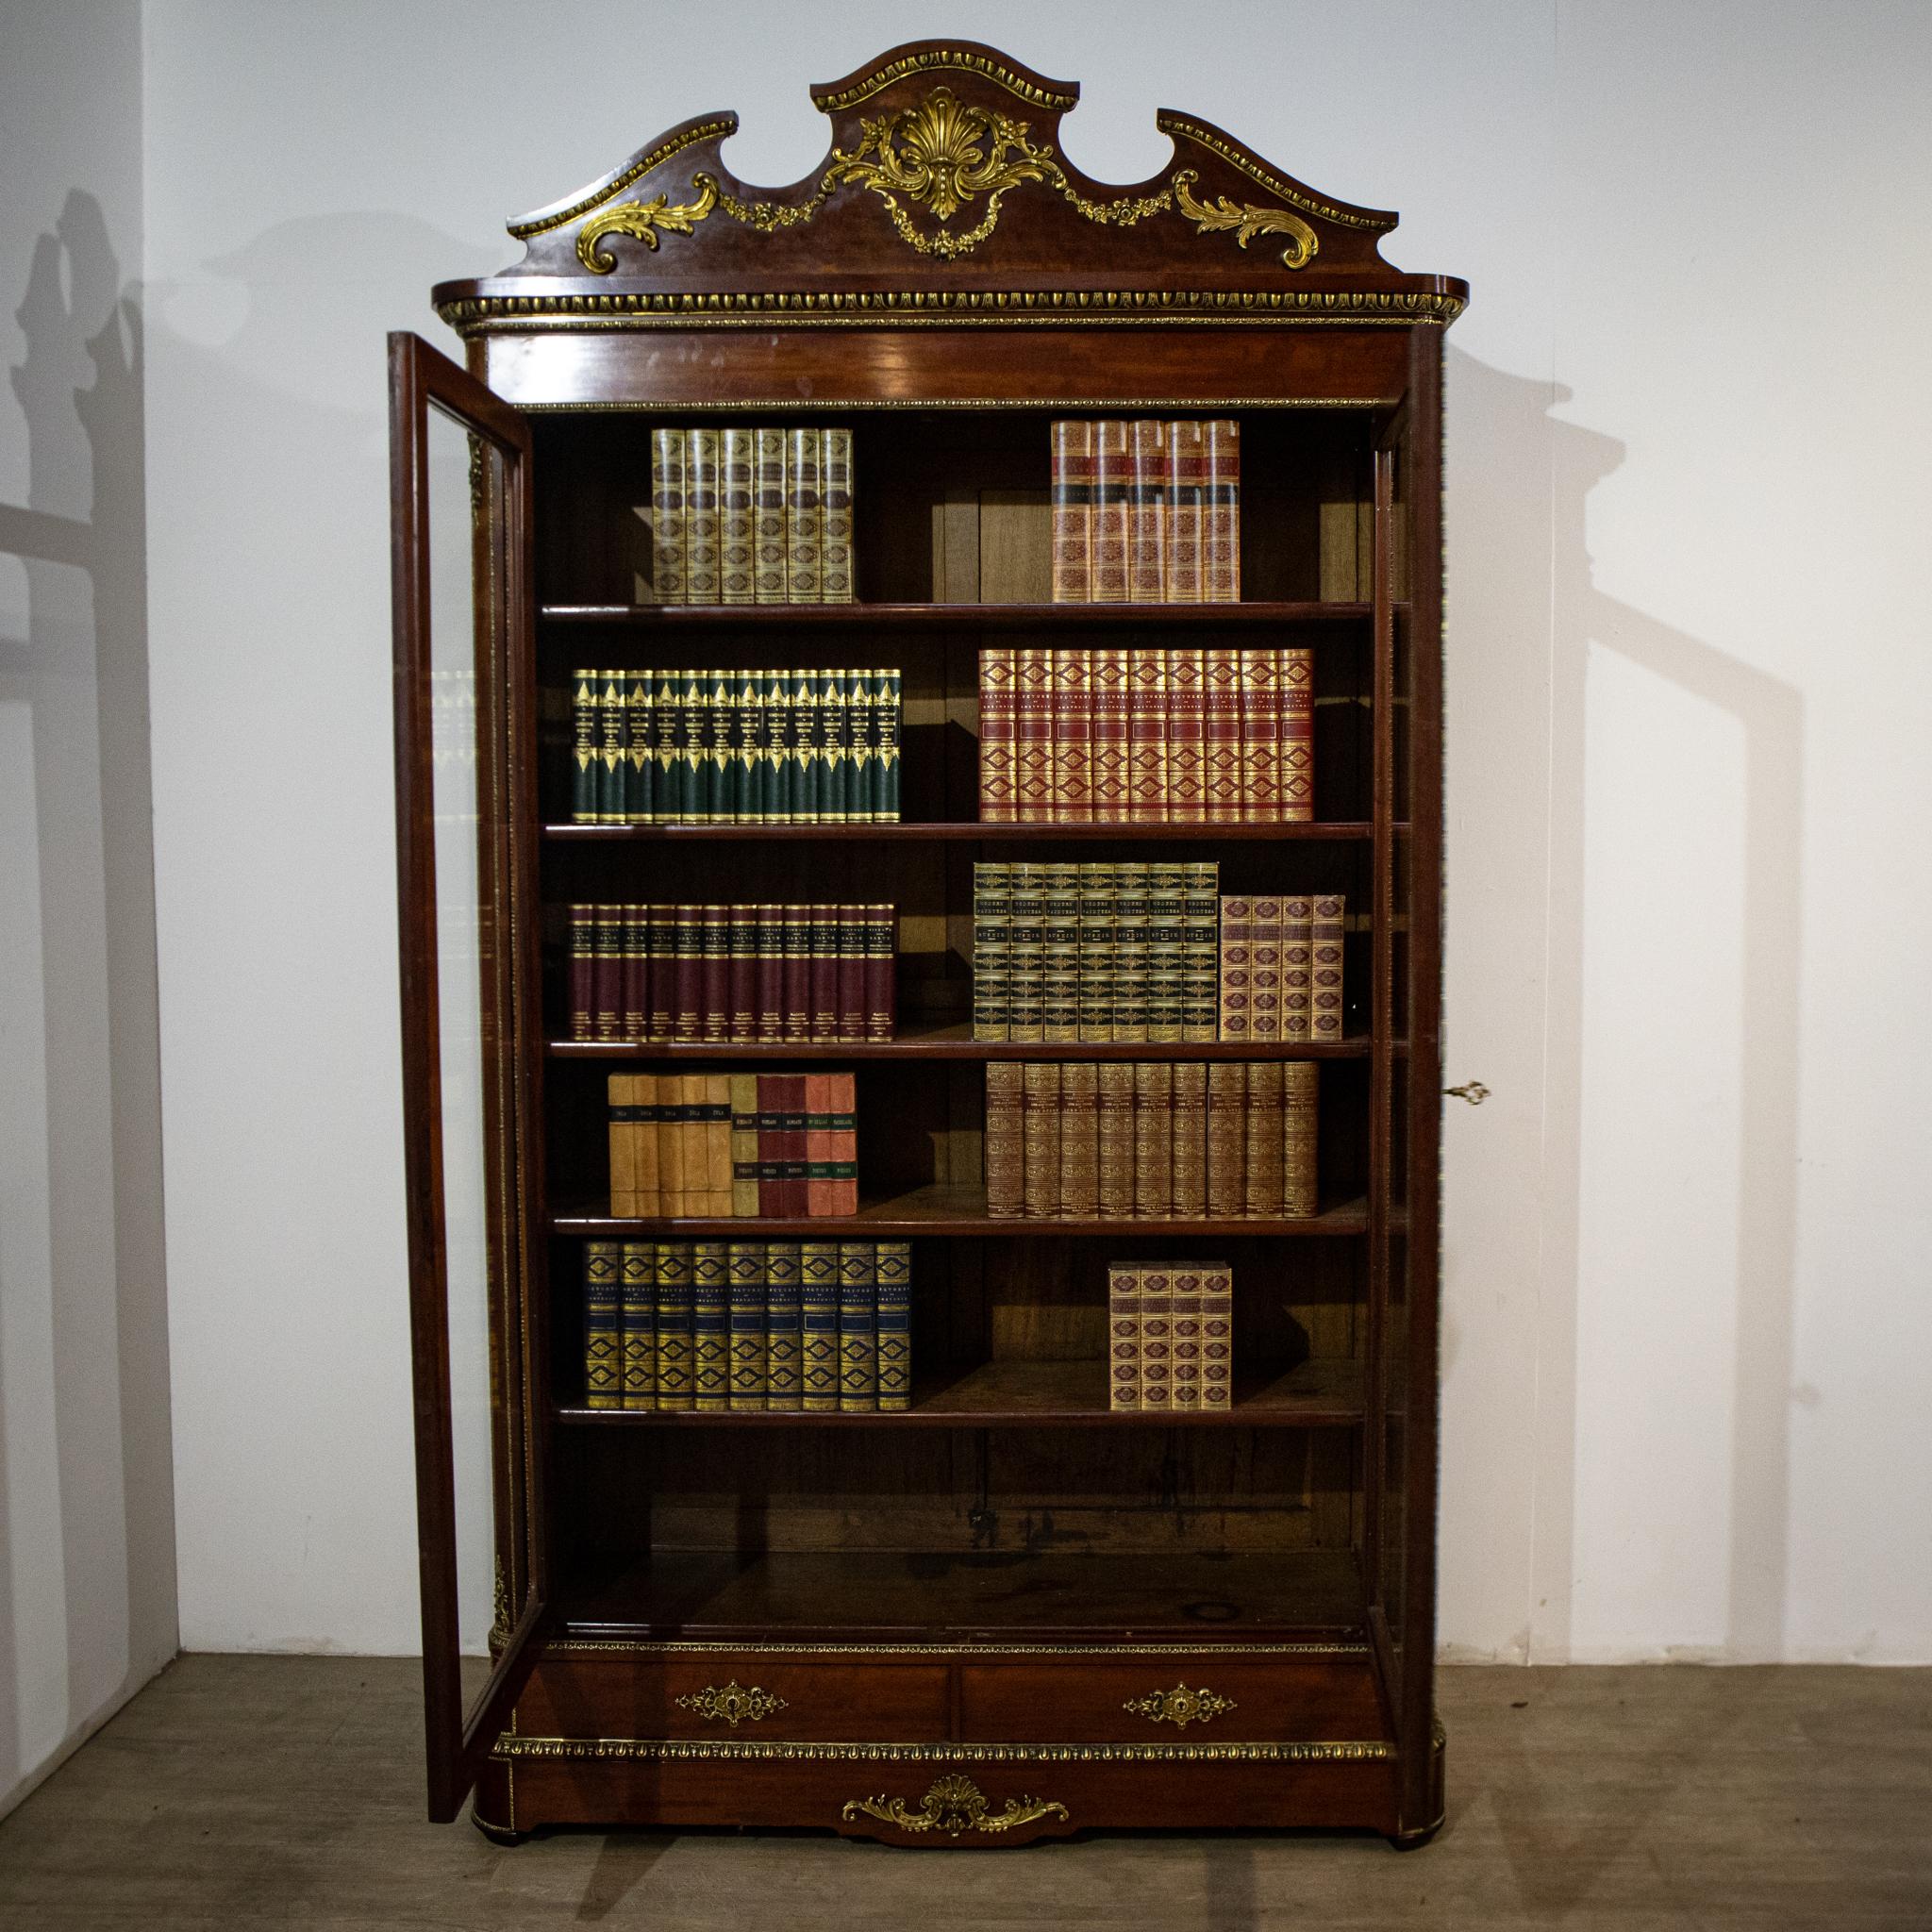 A magnificent 19th century glazed bookcase from the period of Napoleon III, this piece is of exceptional quality. In line with French practice of the time, it is designed to be dismantled to allow easy transport and installation. With five